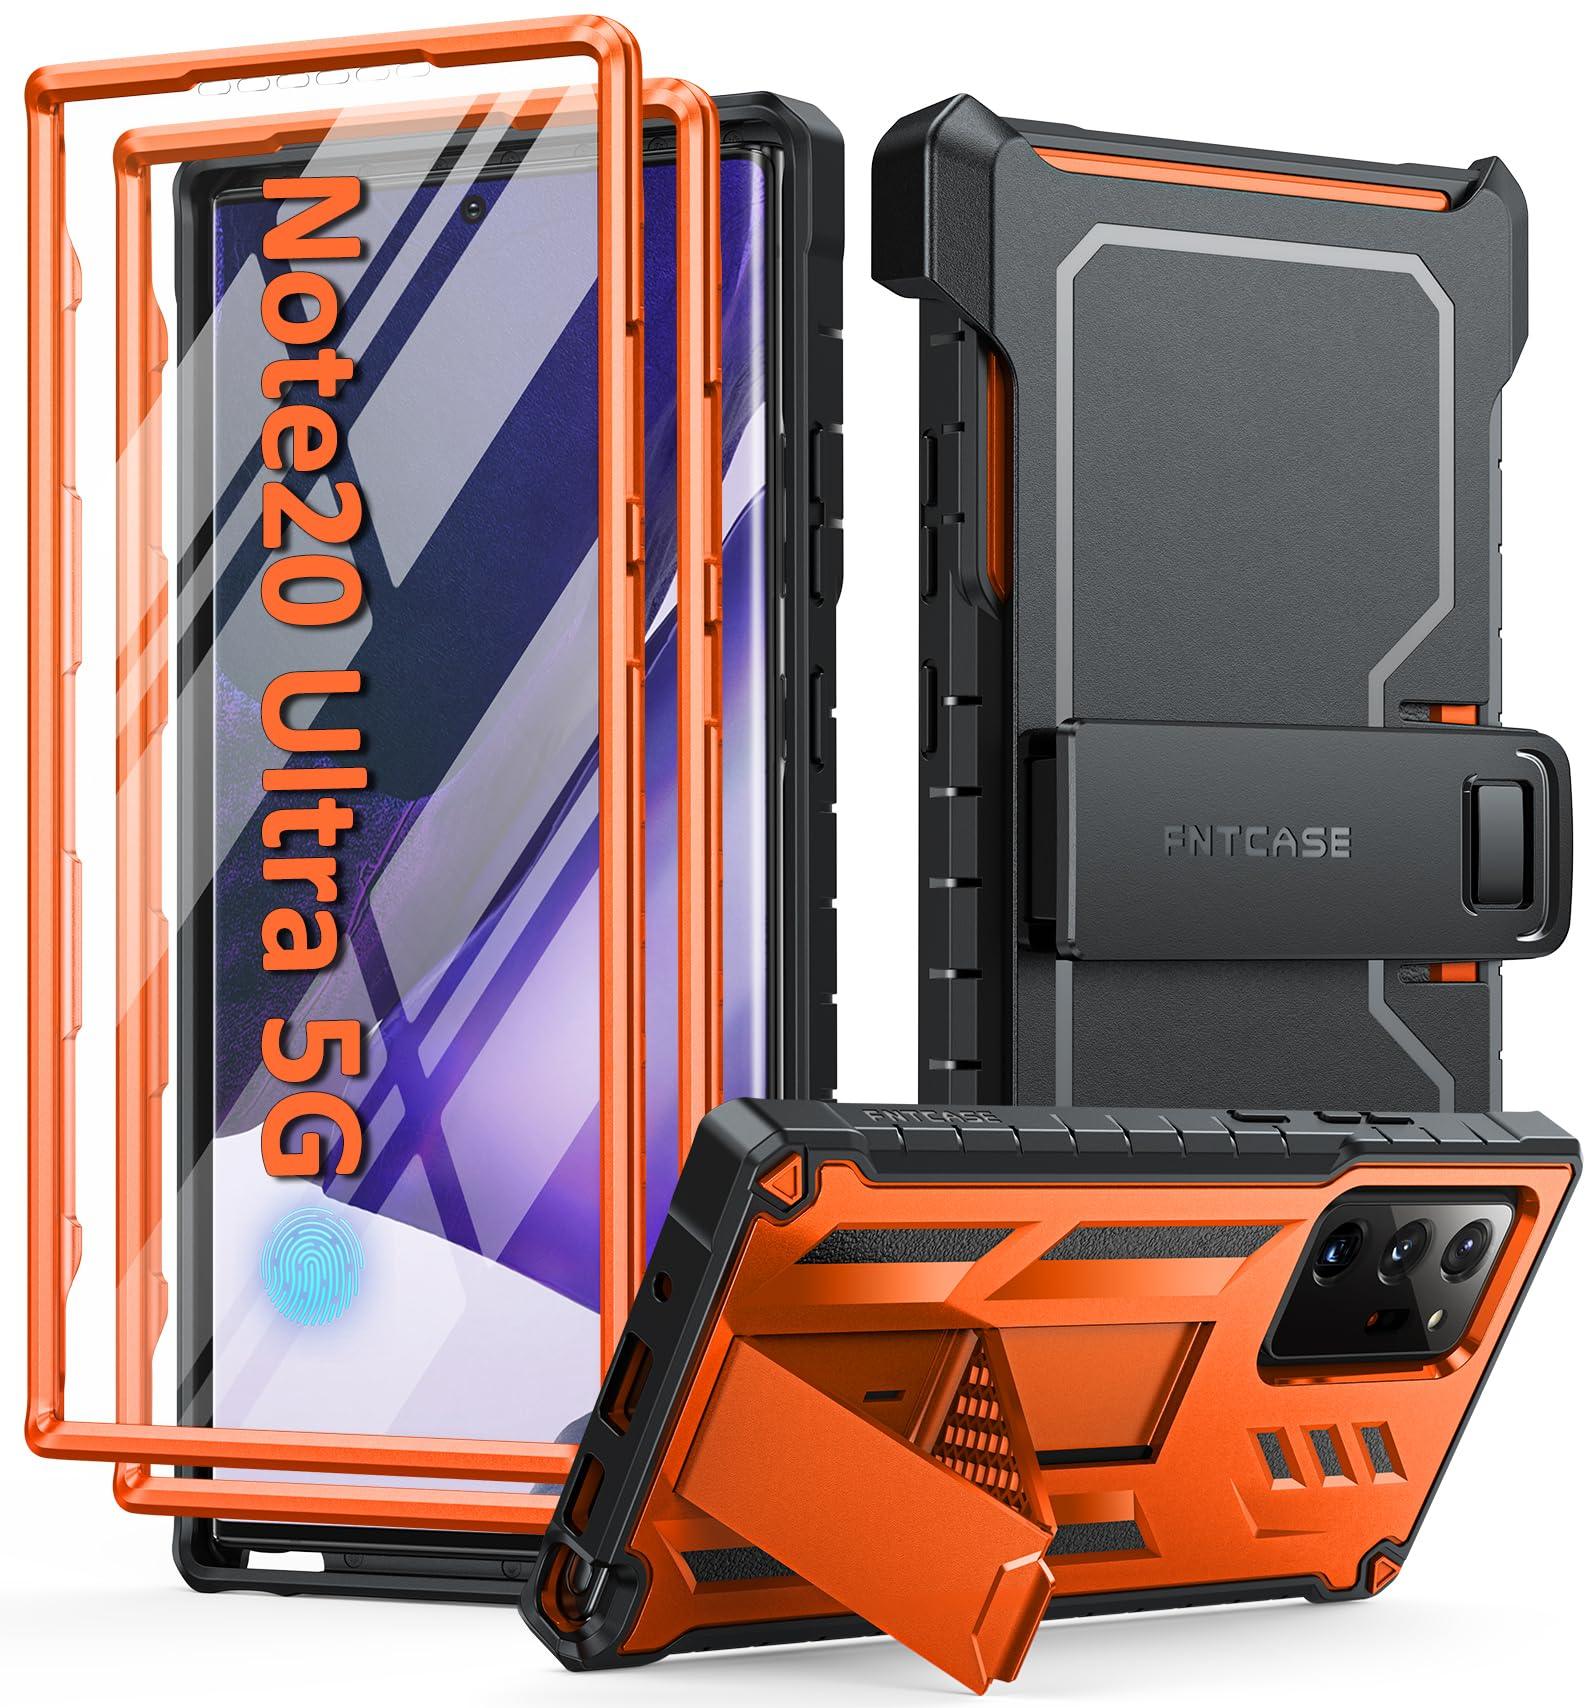 Samsung Galaxy Note-20-ultra Case: with Belt-Clip Holster & Built-in Screen Protector & Kickstand - FNTCASE OFFICIAL